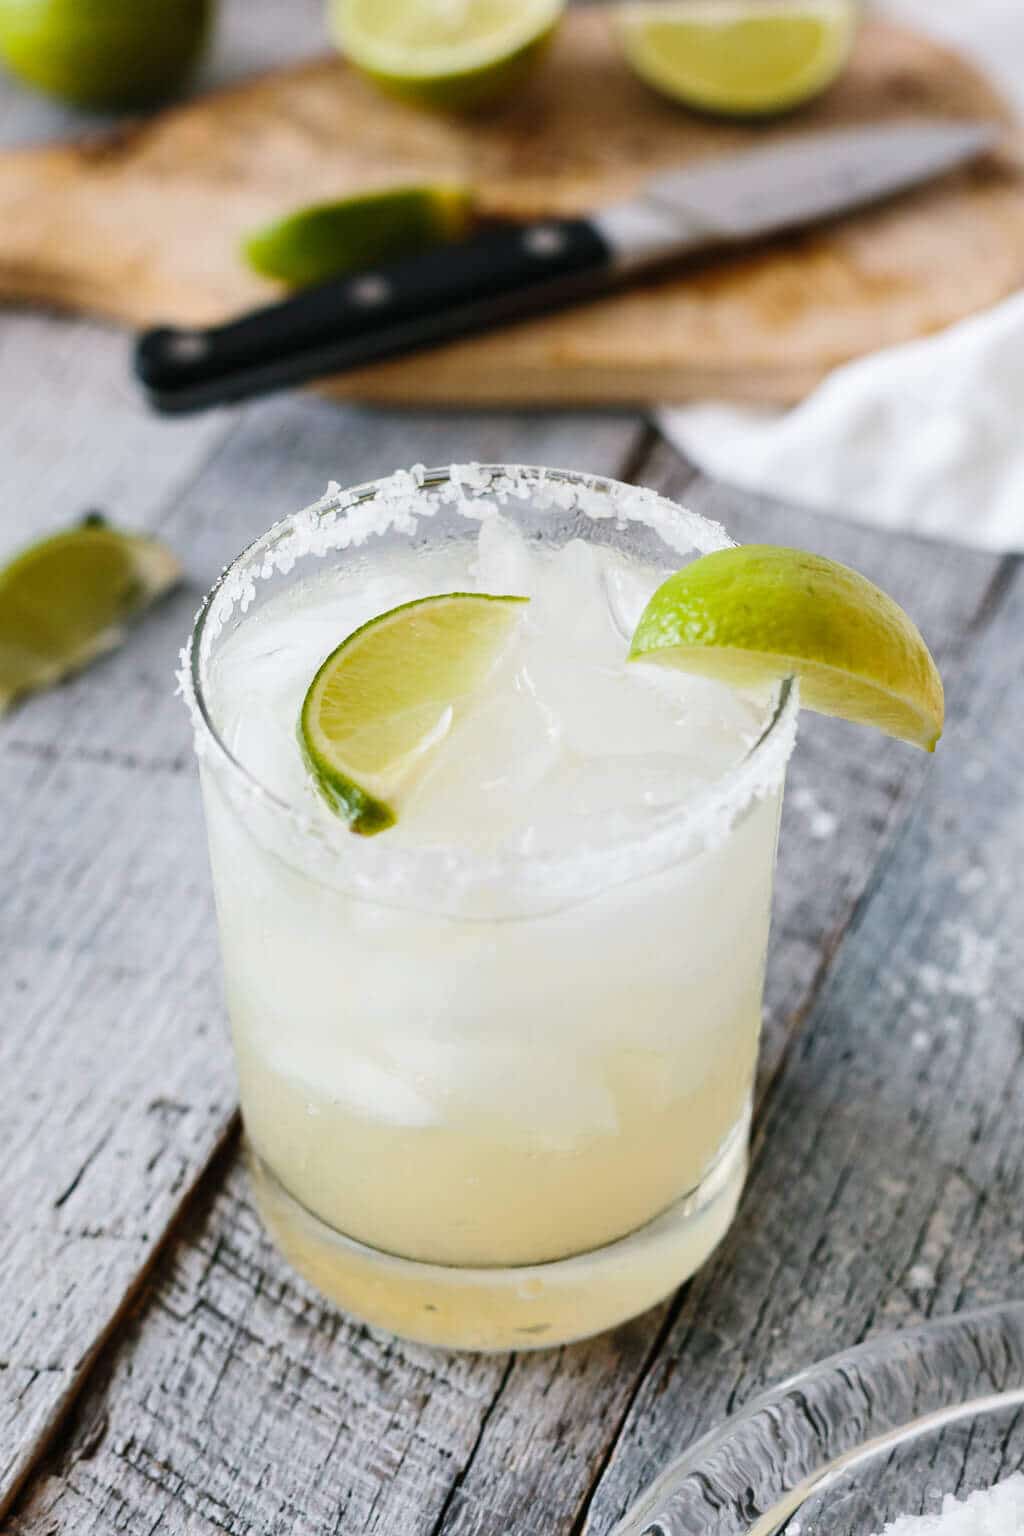 Satisfy Your Craving For A Refreshing Margarita With This Foolproof Recipe